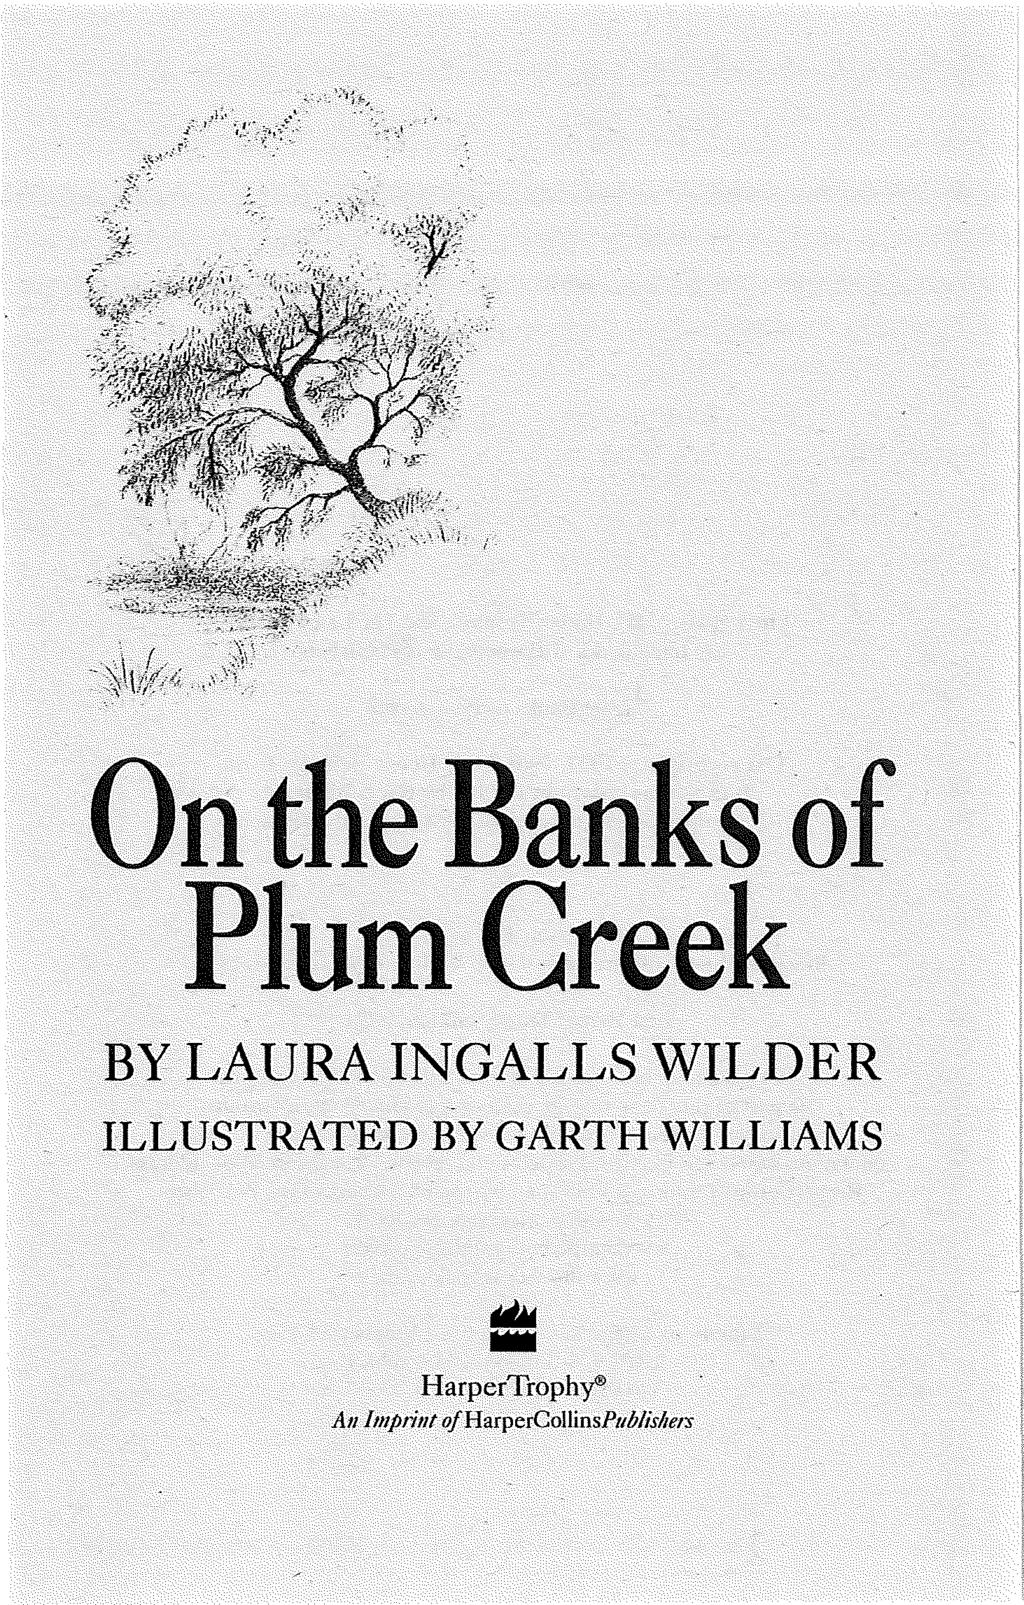 On the Banks of Plum Creek BY LAURA INGALLS WILDER ILLUSTRATED BY